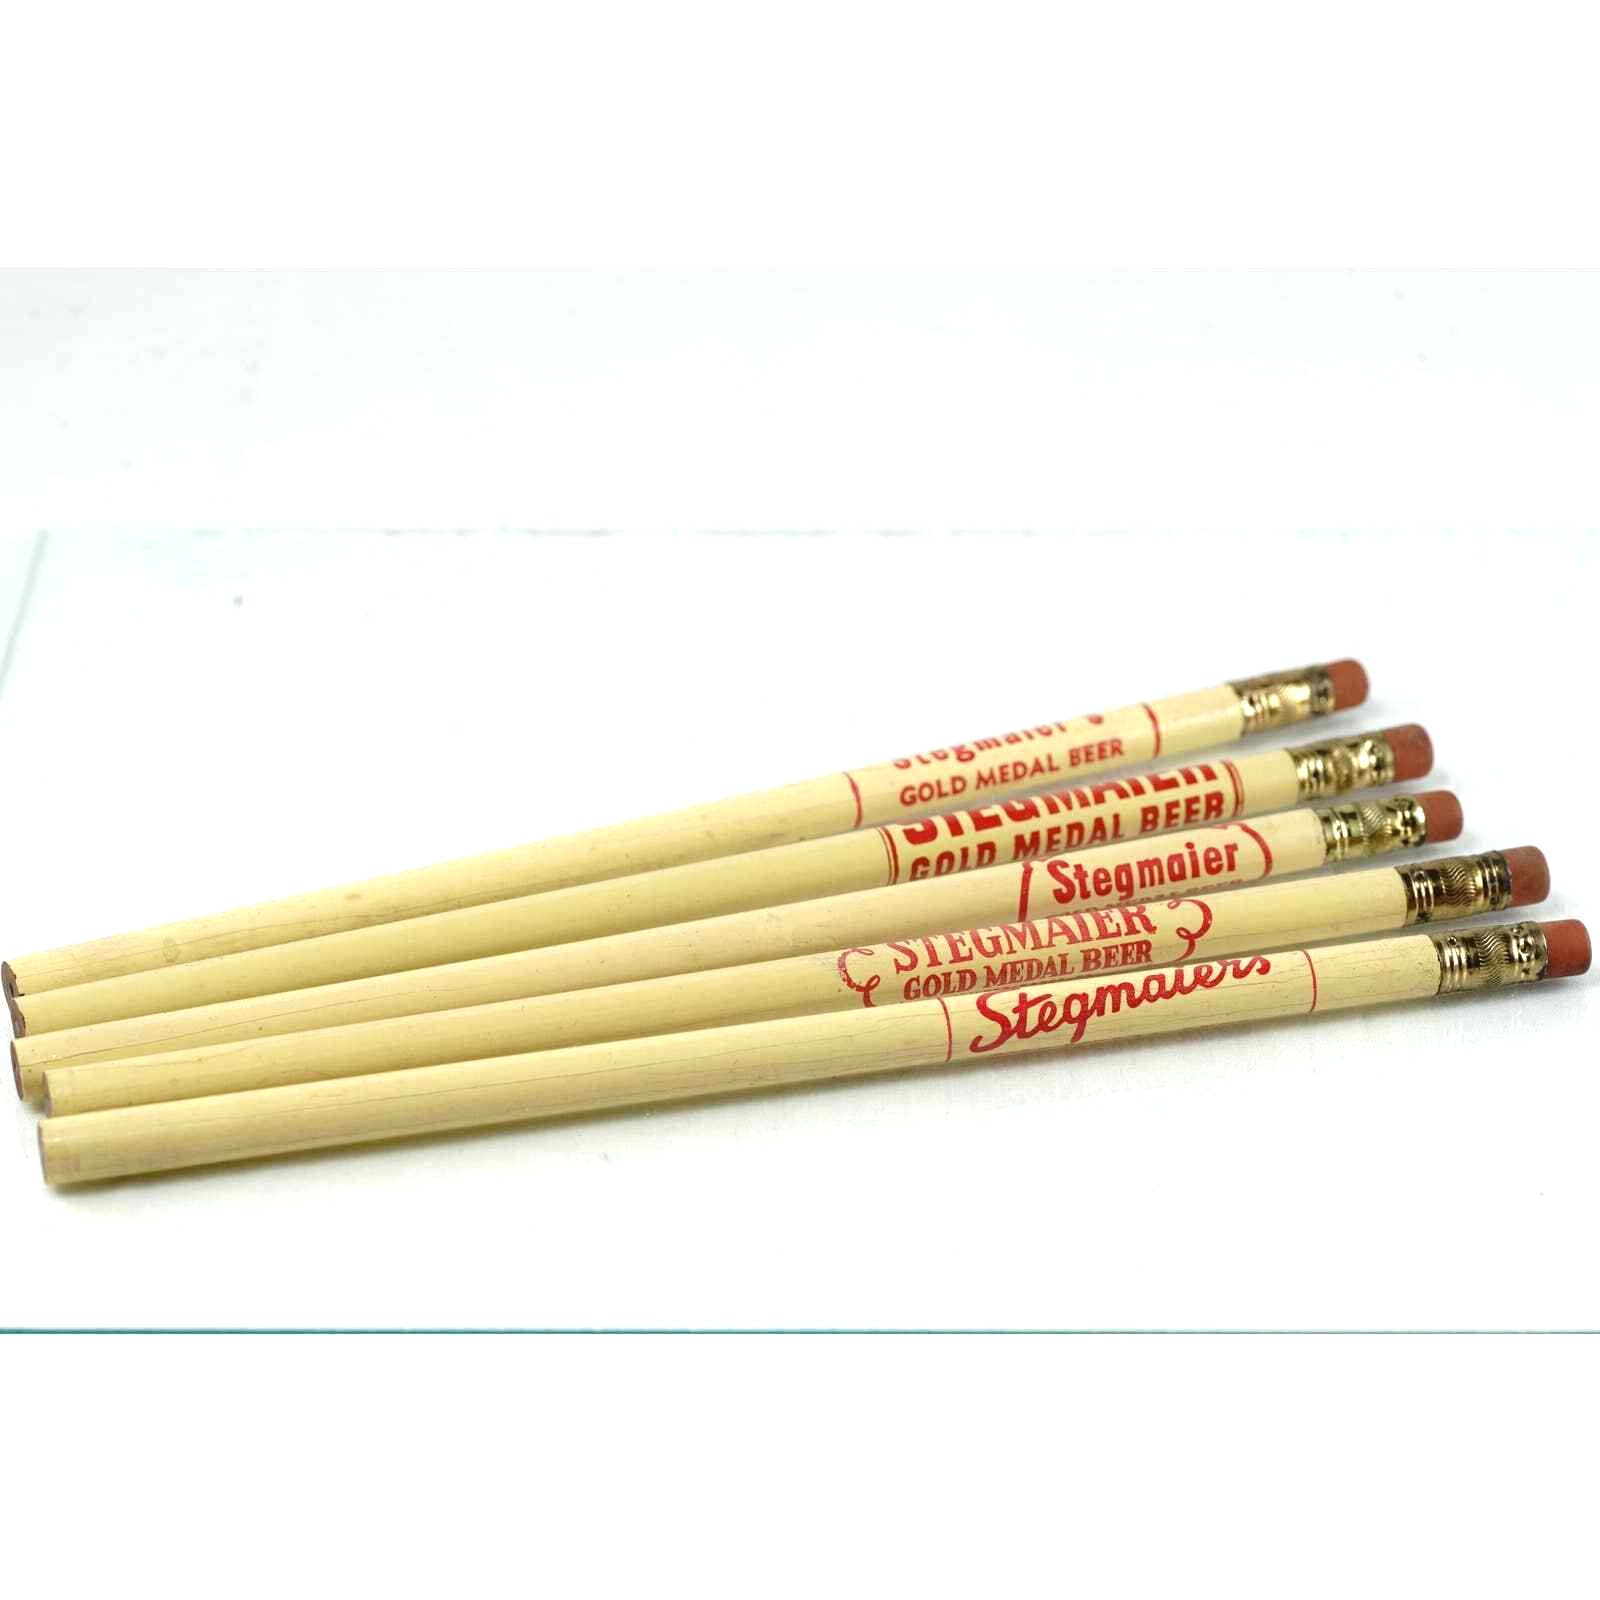 Lot of 5 Stegmaier Gold Medal Beer Brewing Company Mid-Century Modern Pencil Lot